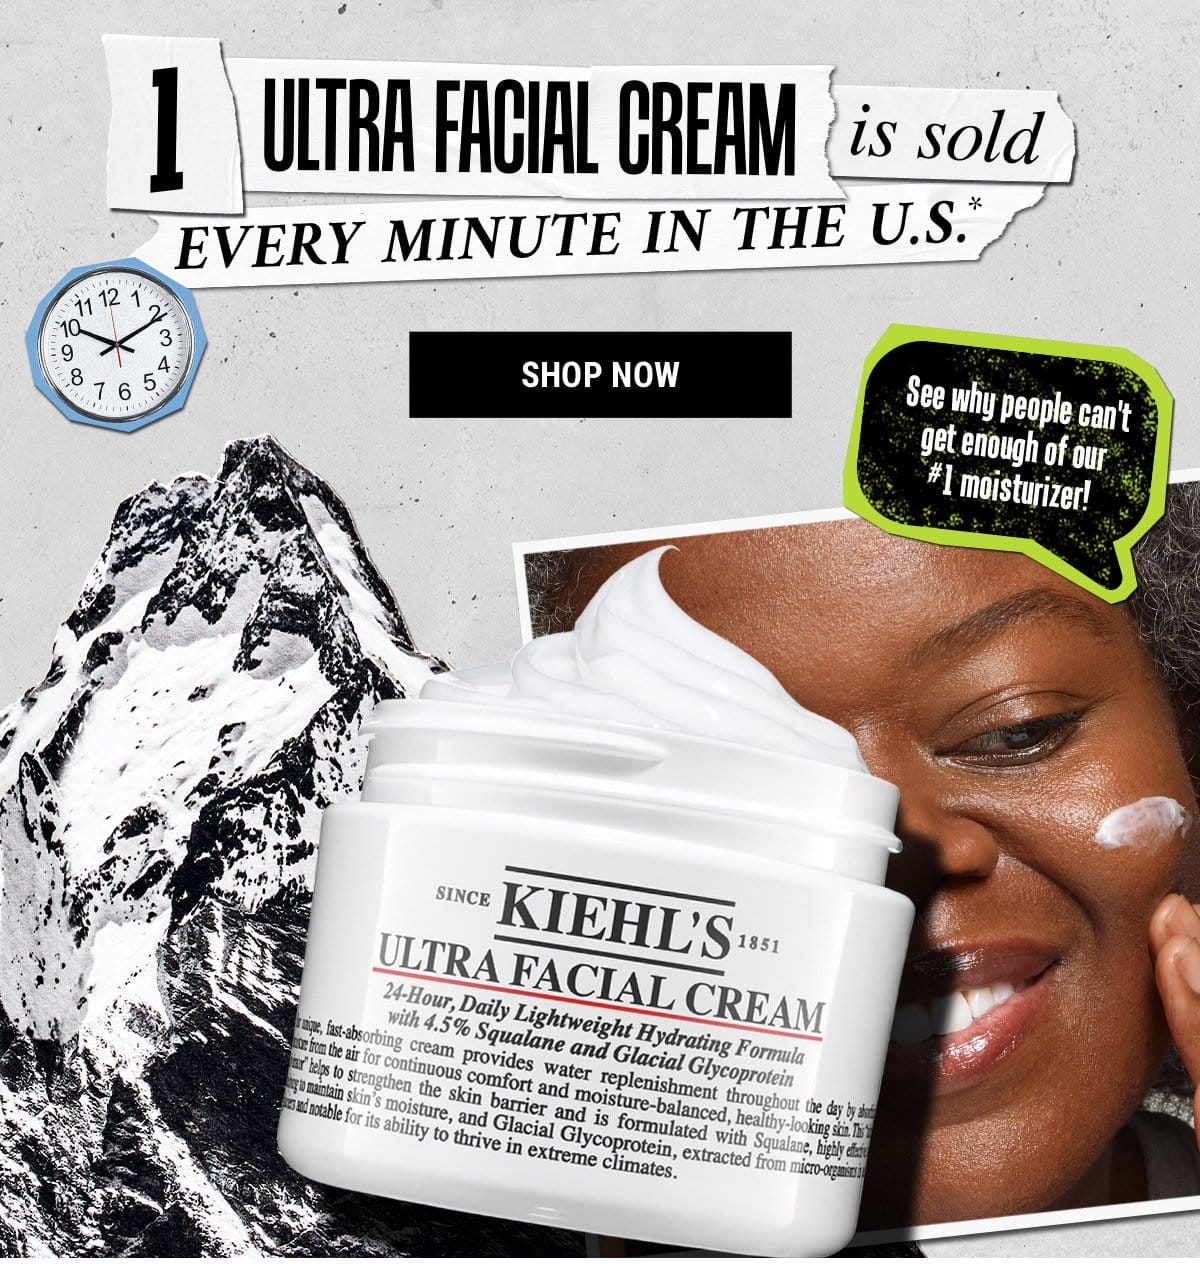 1 Ultra Facial Cream is Sold Every Minute In The U.S.